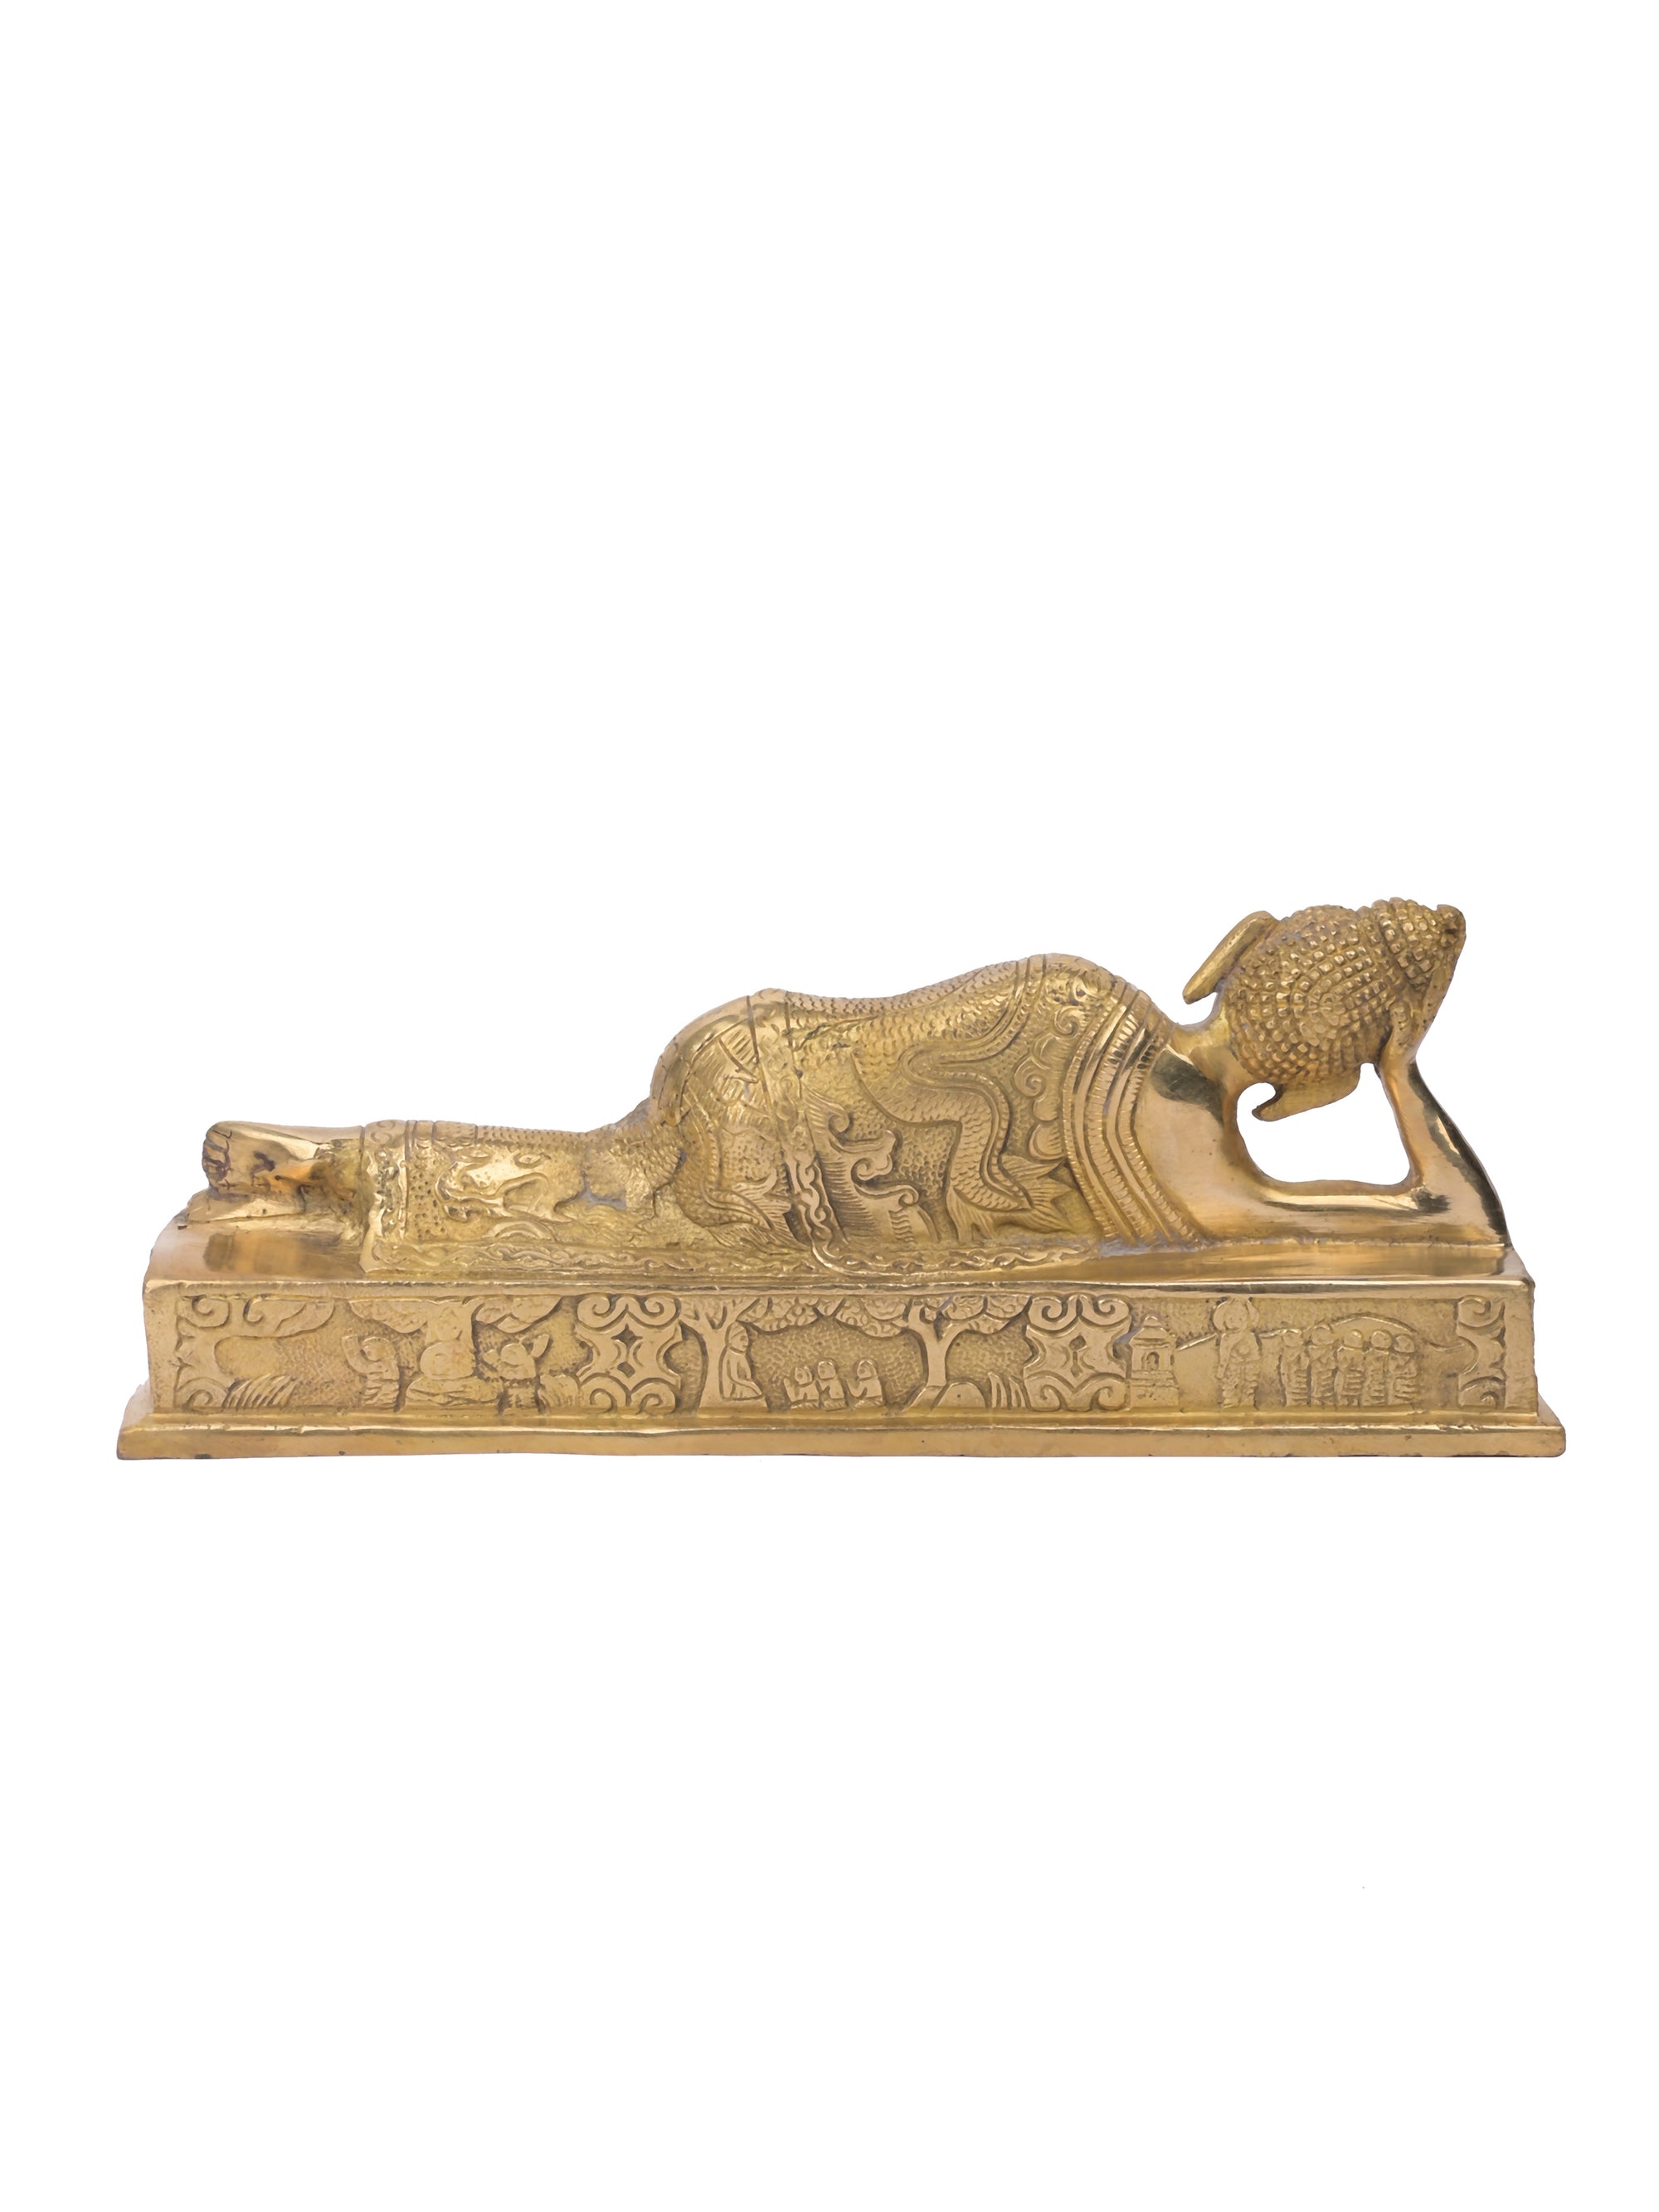 12 inches Sleeping Lord Buddha Idol made of Brass with antique finish - The Heritage Artifacts